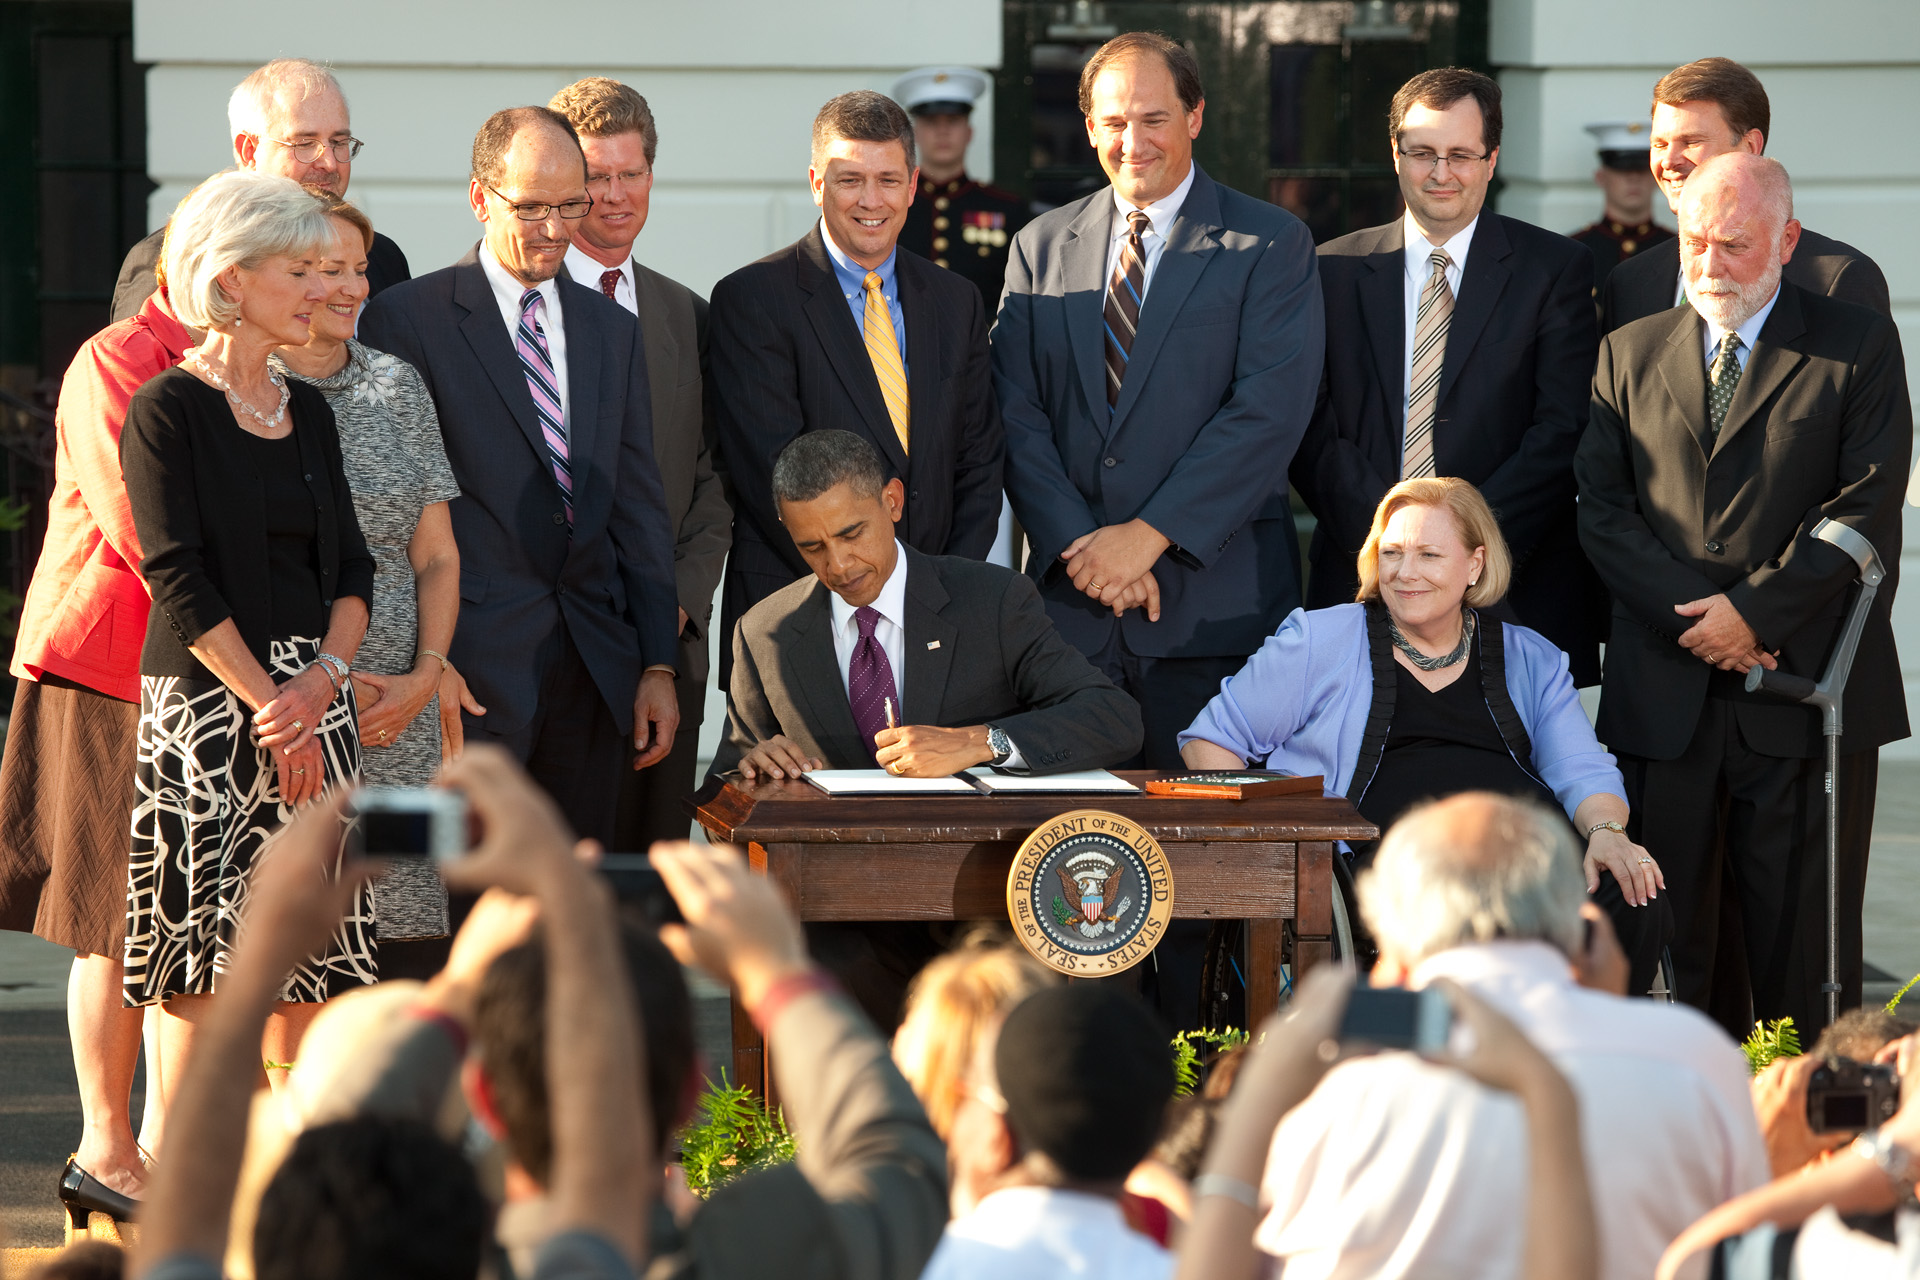 President Barack Obama signs Executive Order commemorating the 20th anniversary of the Americans with Disabilities Act 